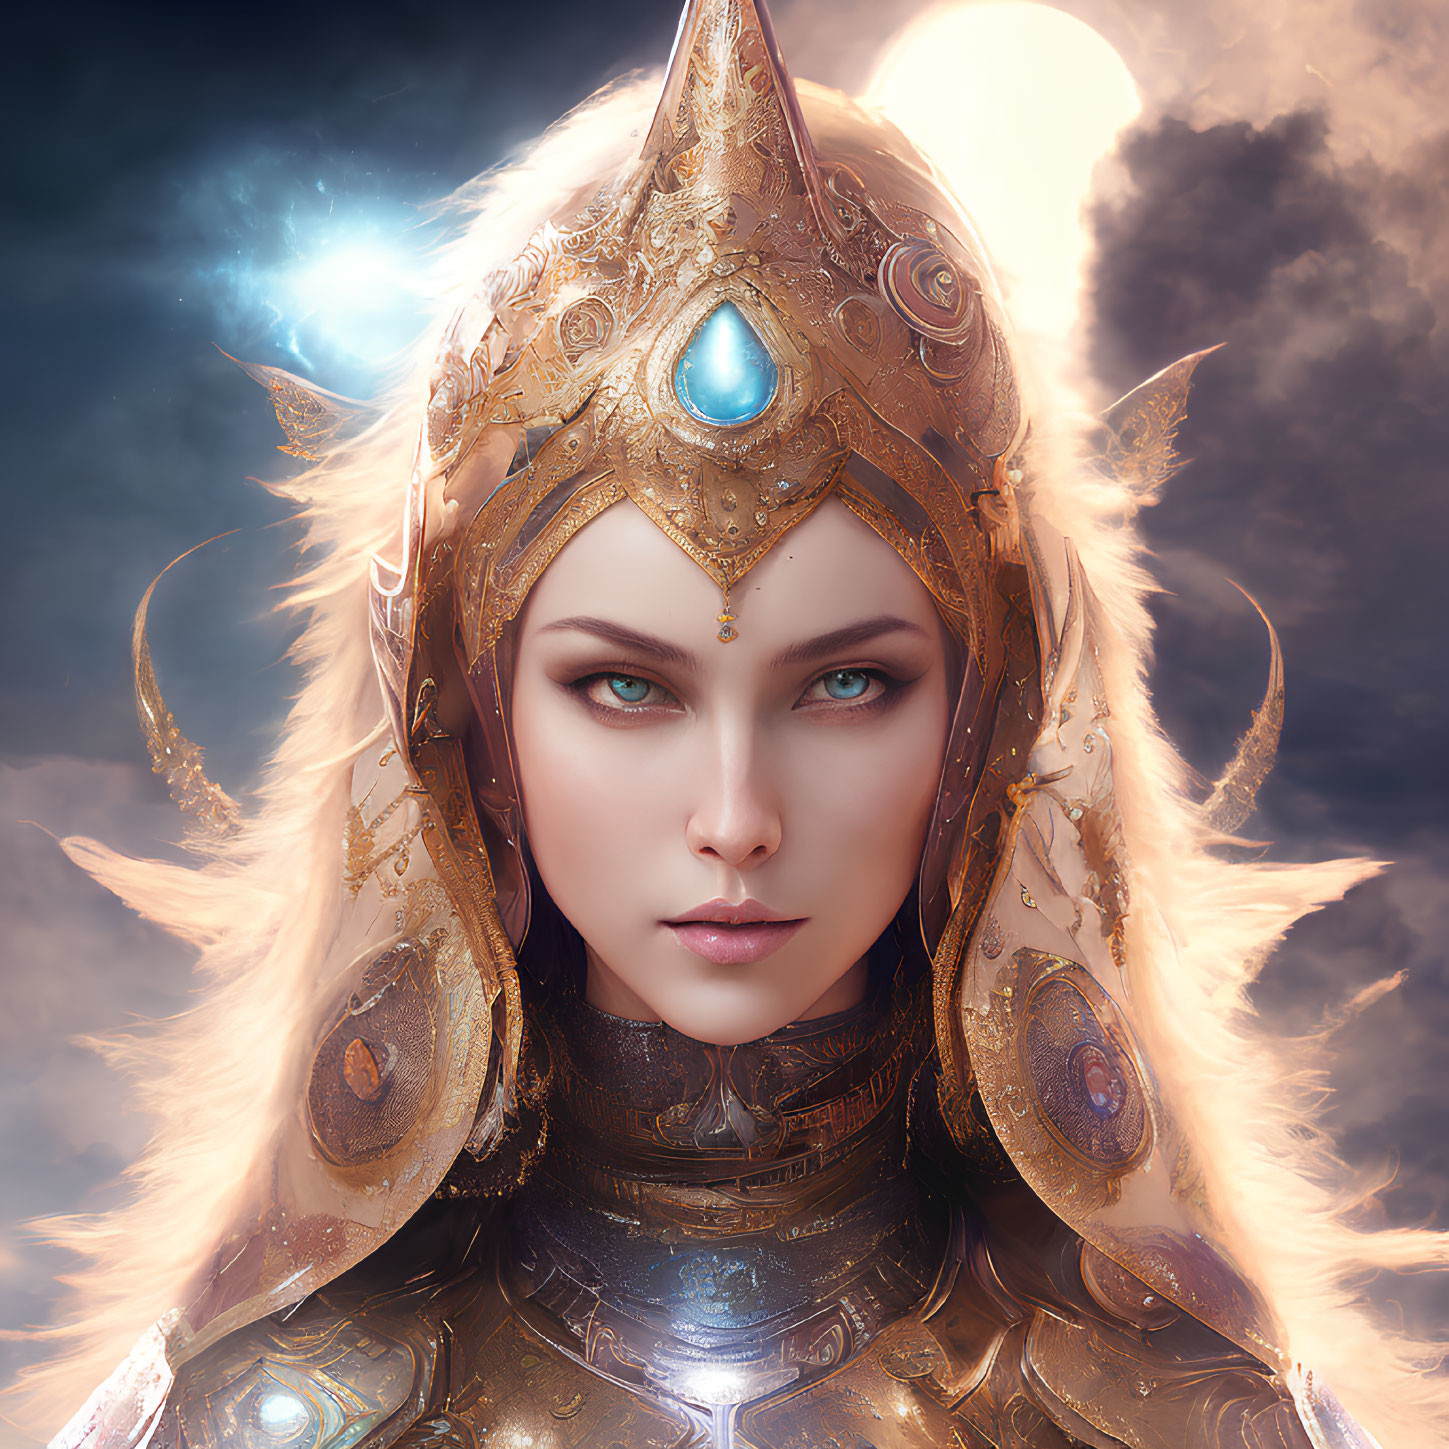 Digital artwork: Female character in golden armor with blue gem, stormy sky background